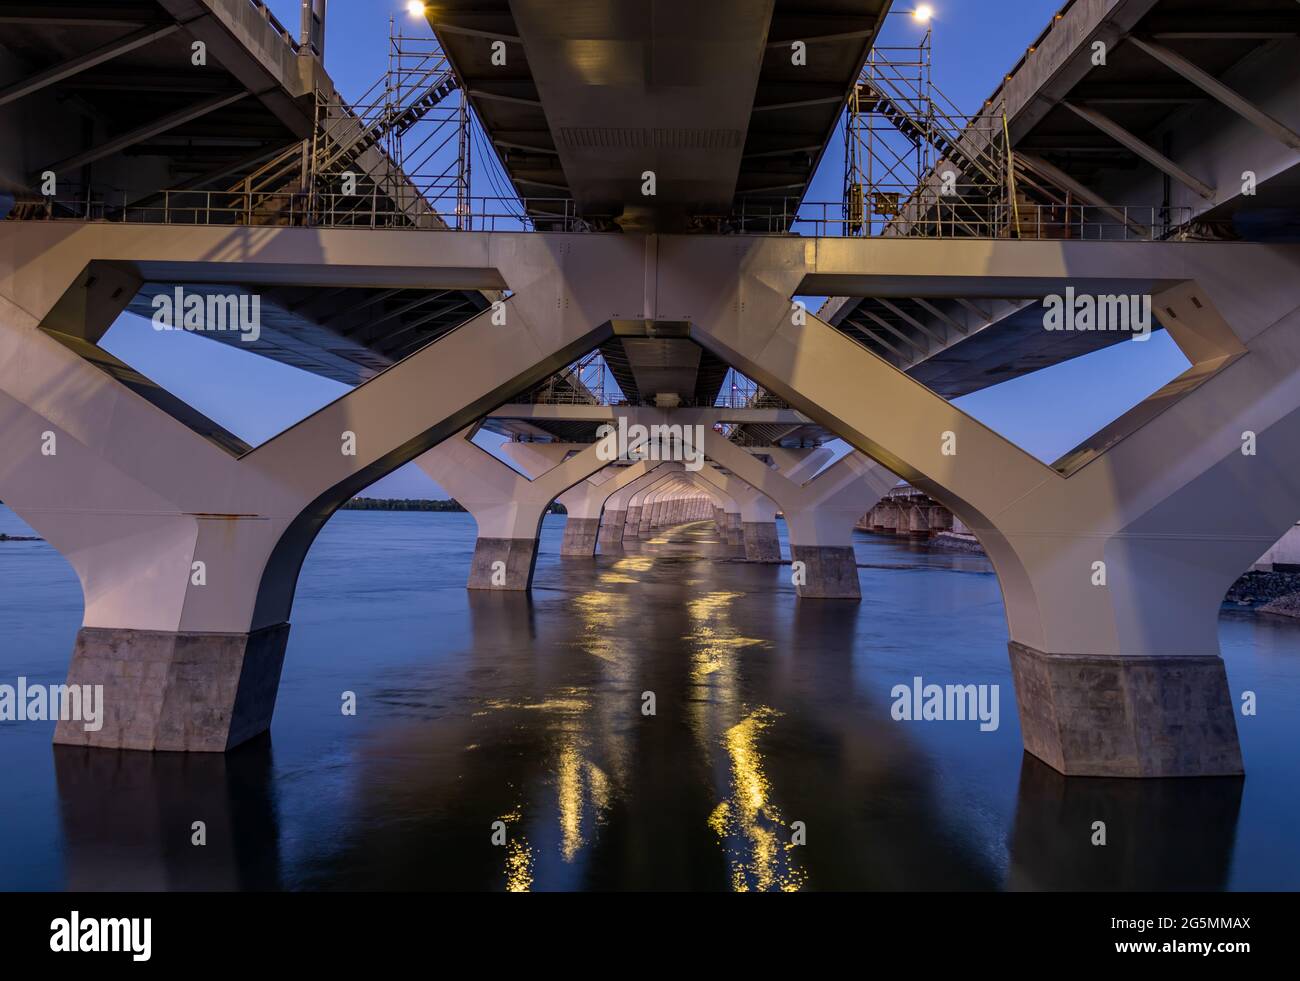 A view under the Champlain bridge in Montreal at sunset. Stock Photo